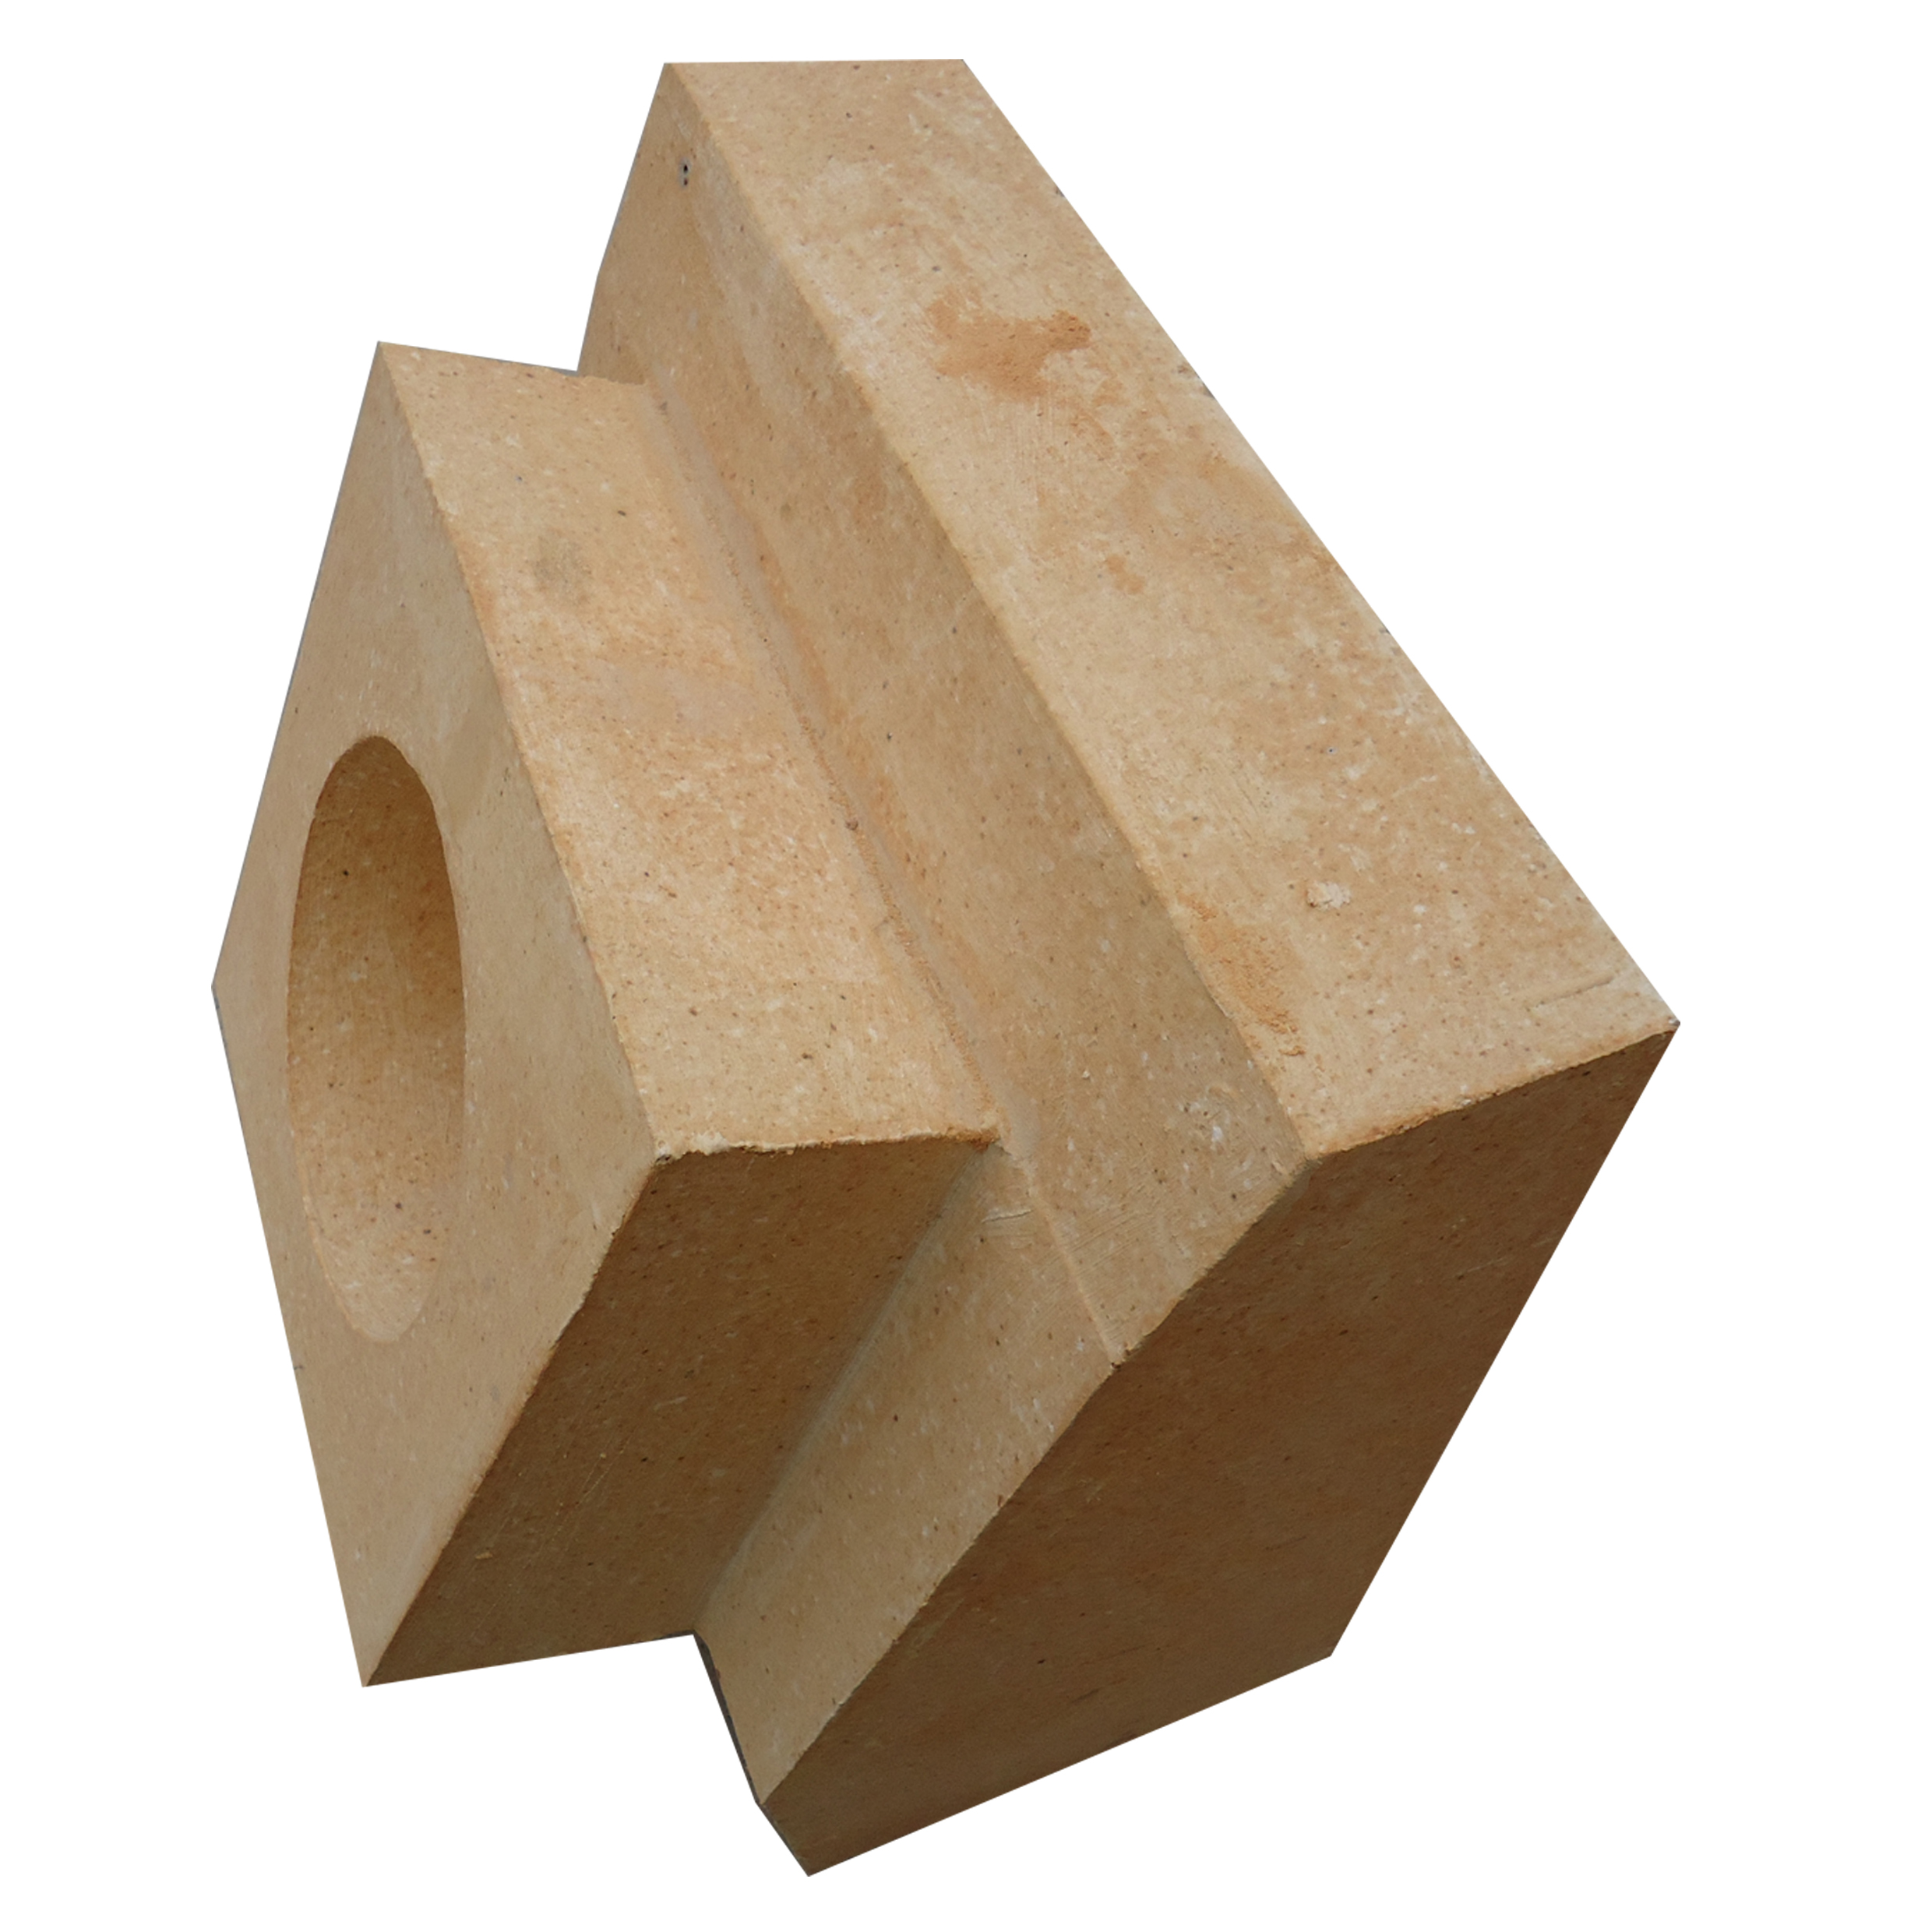 High temperature refractory fire brick for Steel Industry